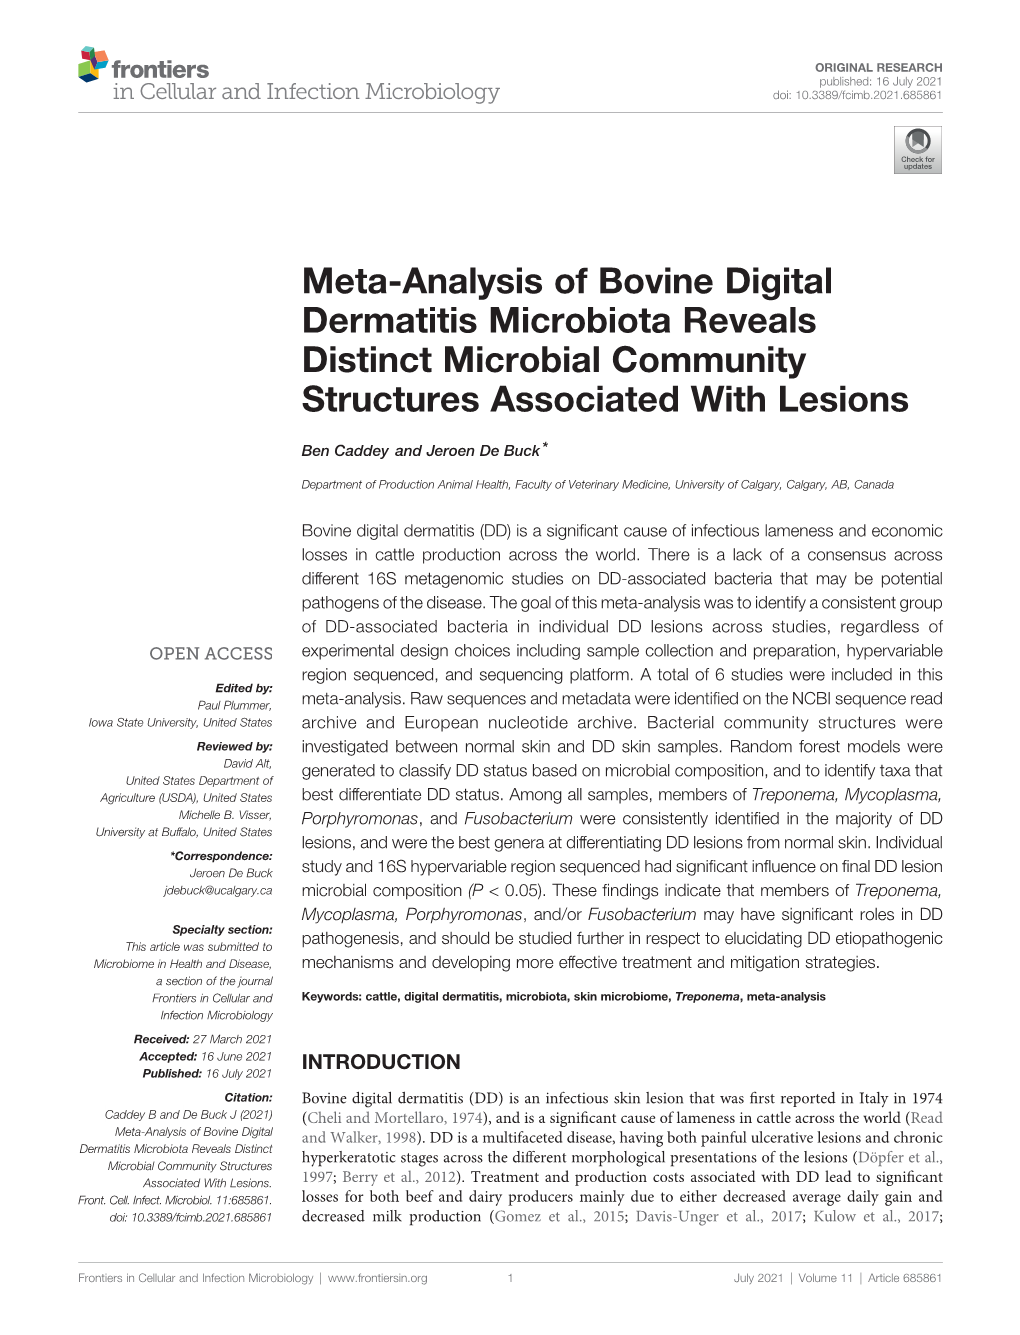 Meta-Analysis of Bovine Digital Dermatitis Microbiota Reveals Distinct Microbial Community Structures Associated with Lesions